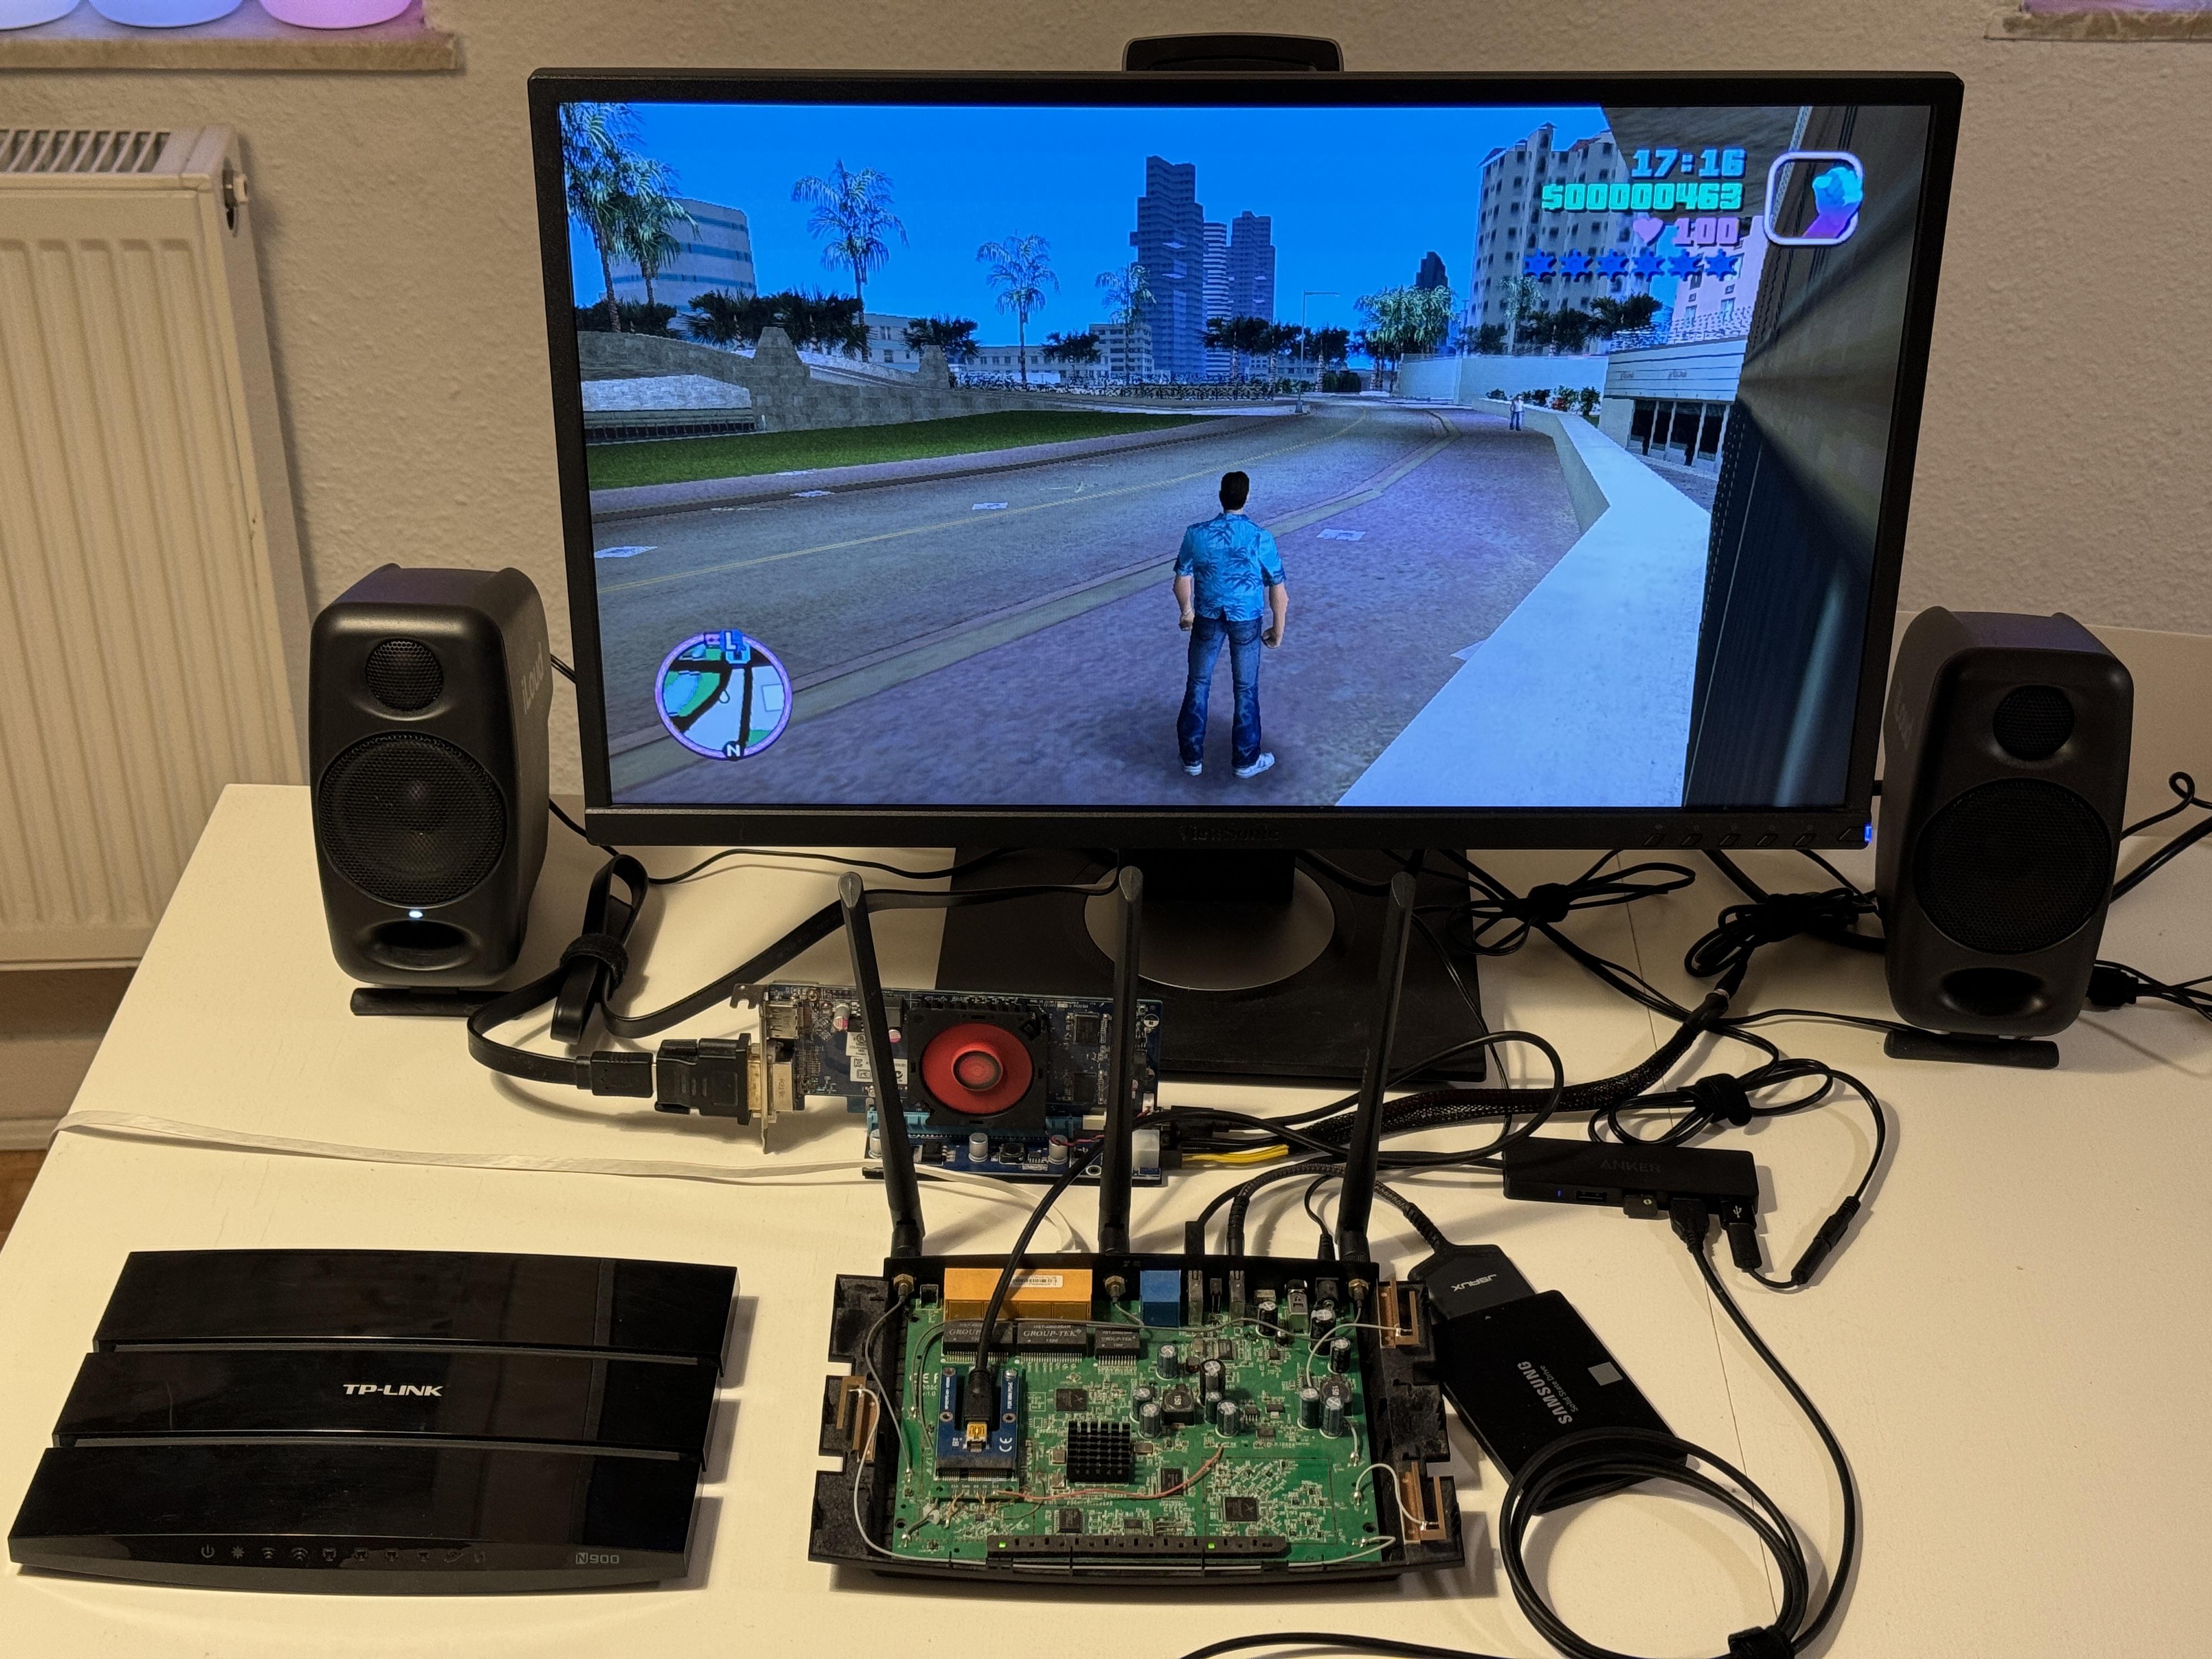 Running GTA: Vice City on a TP-Link TL-WDR4900 wireless router